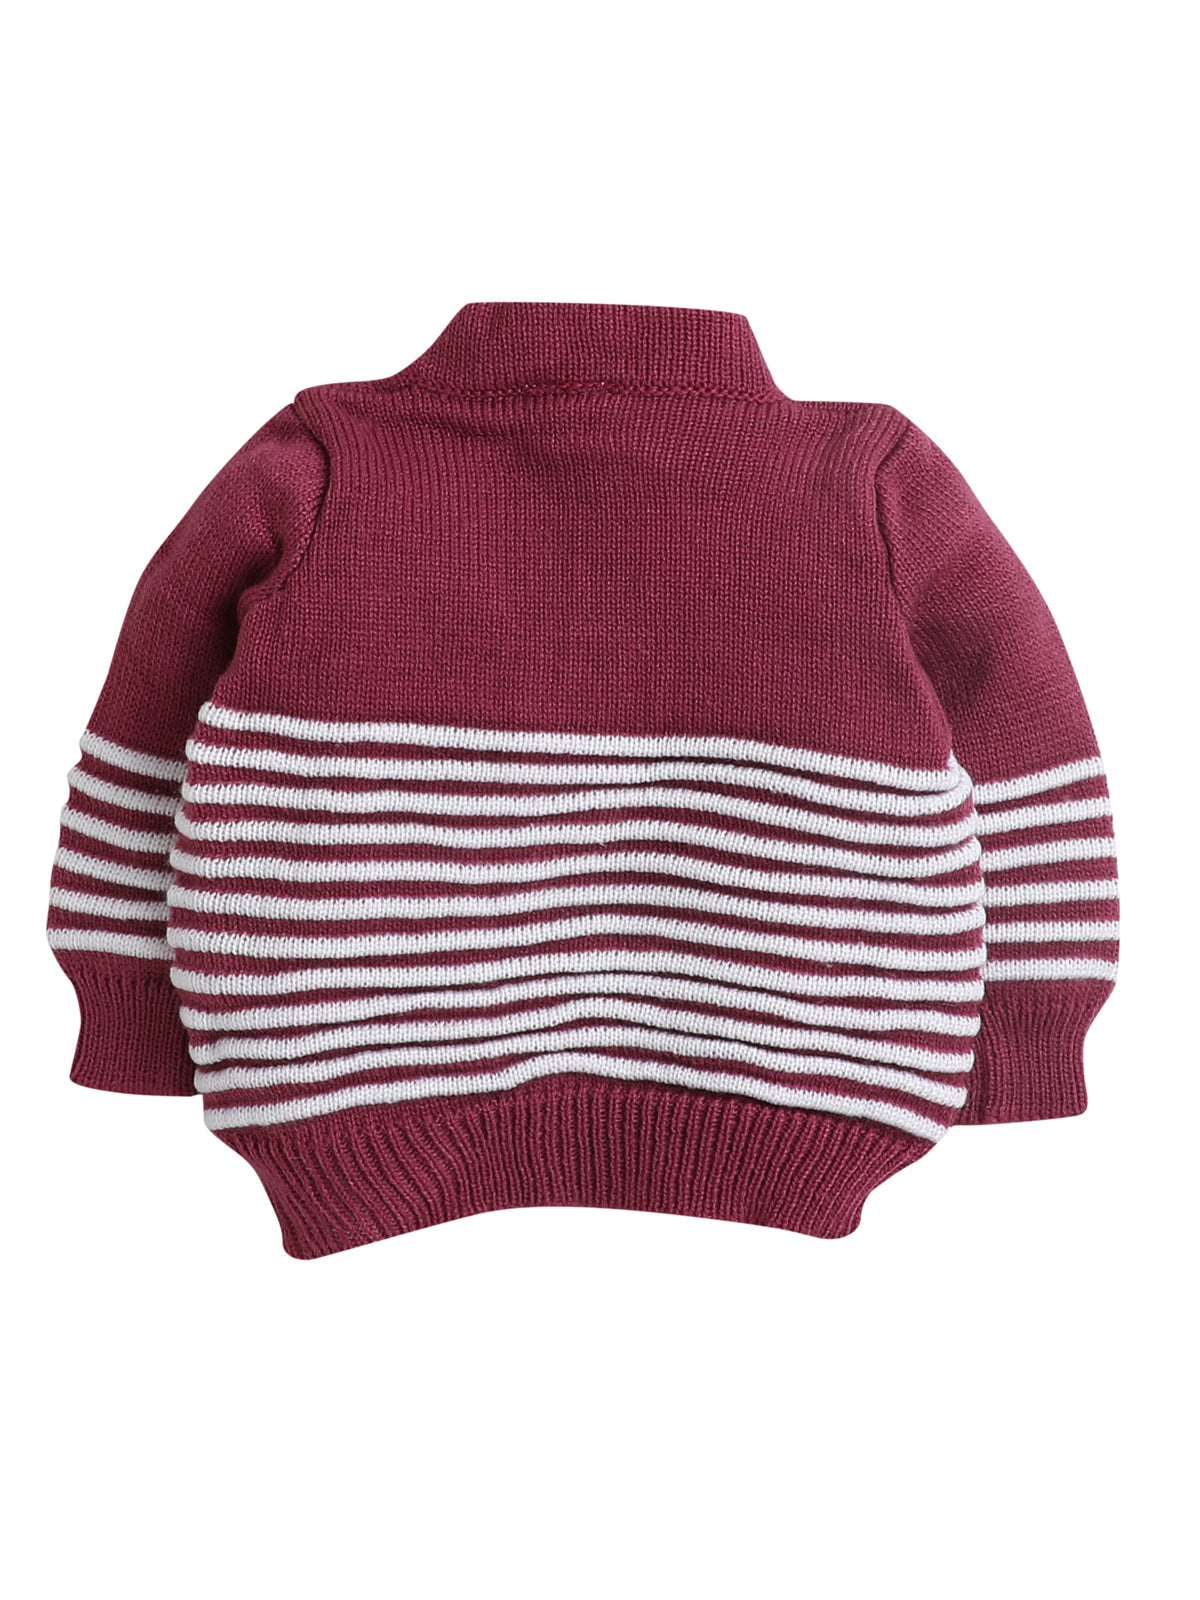 Wine and Cream Color Sweater with matching caps and socks for infants